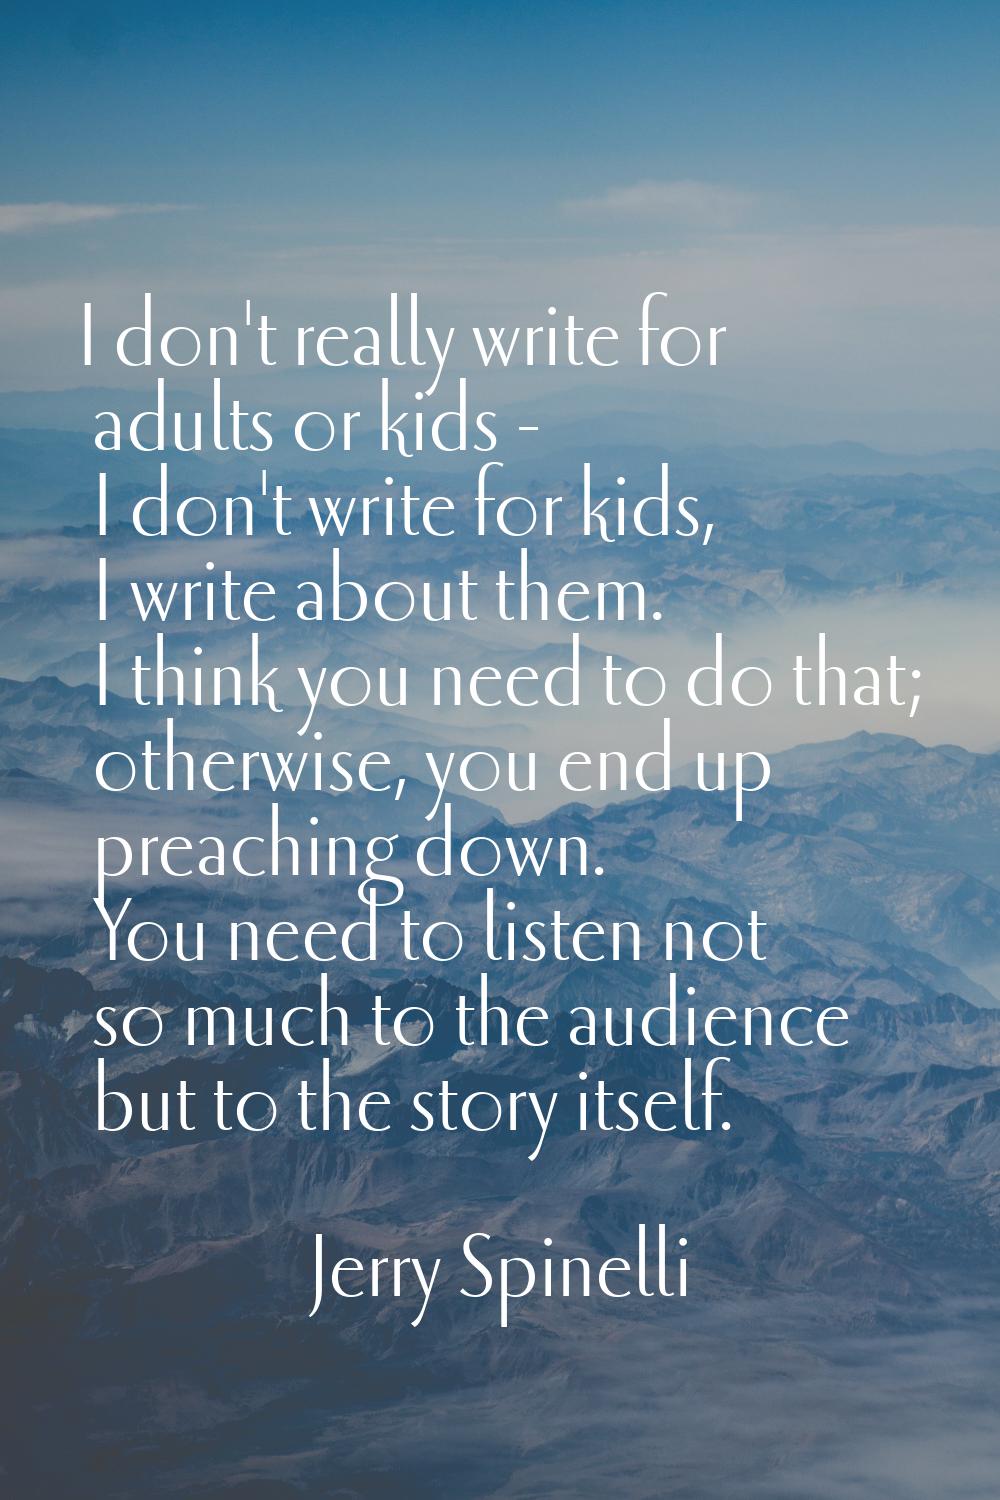 I don't really write for adults or kids - I don't write for kids, I write about them. I think you n